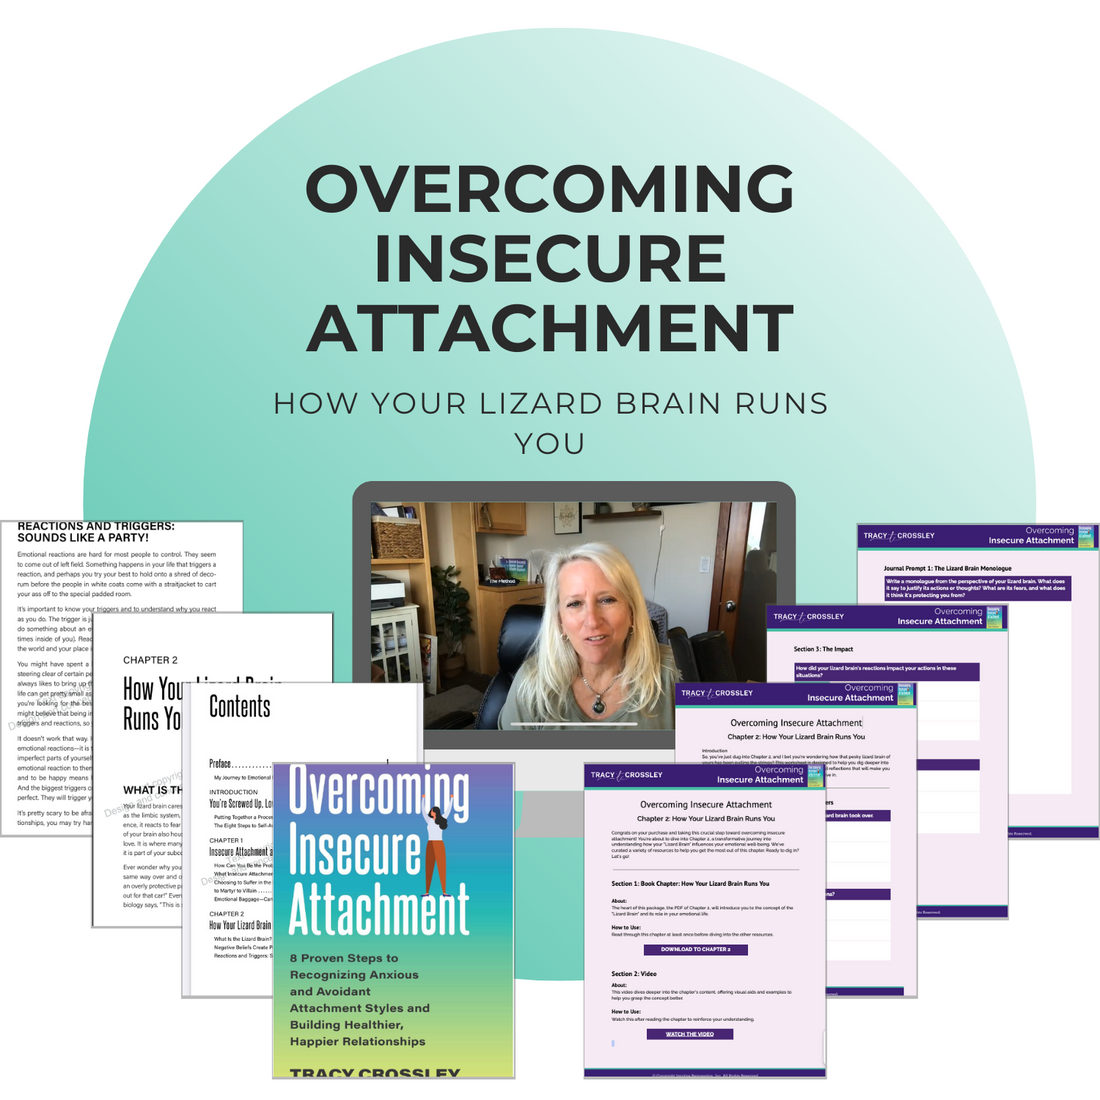 Overcoming Insecure Attachment | How Your Lizard Brain Runs You